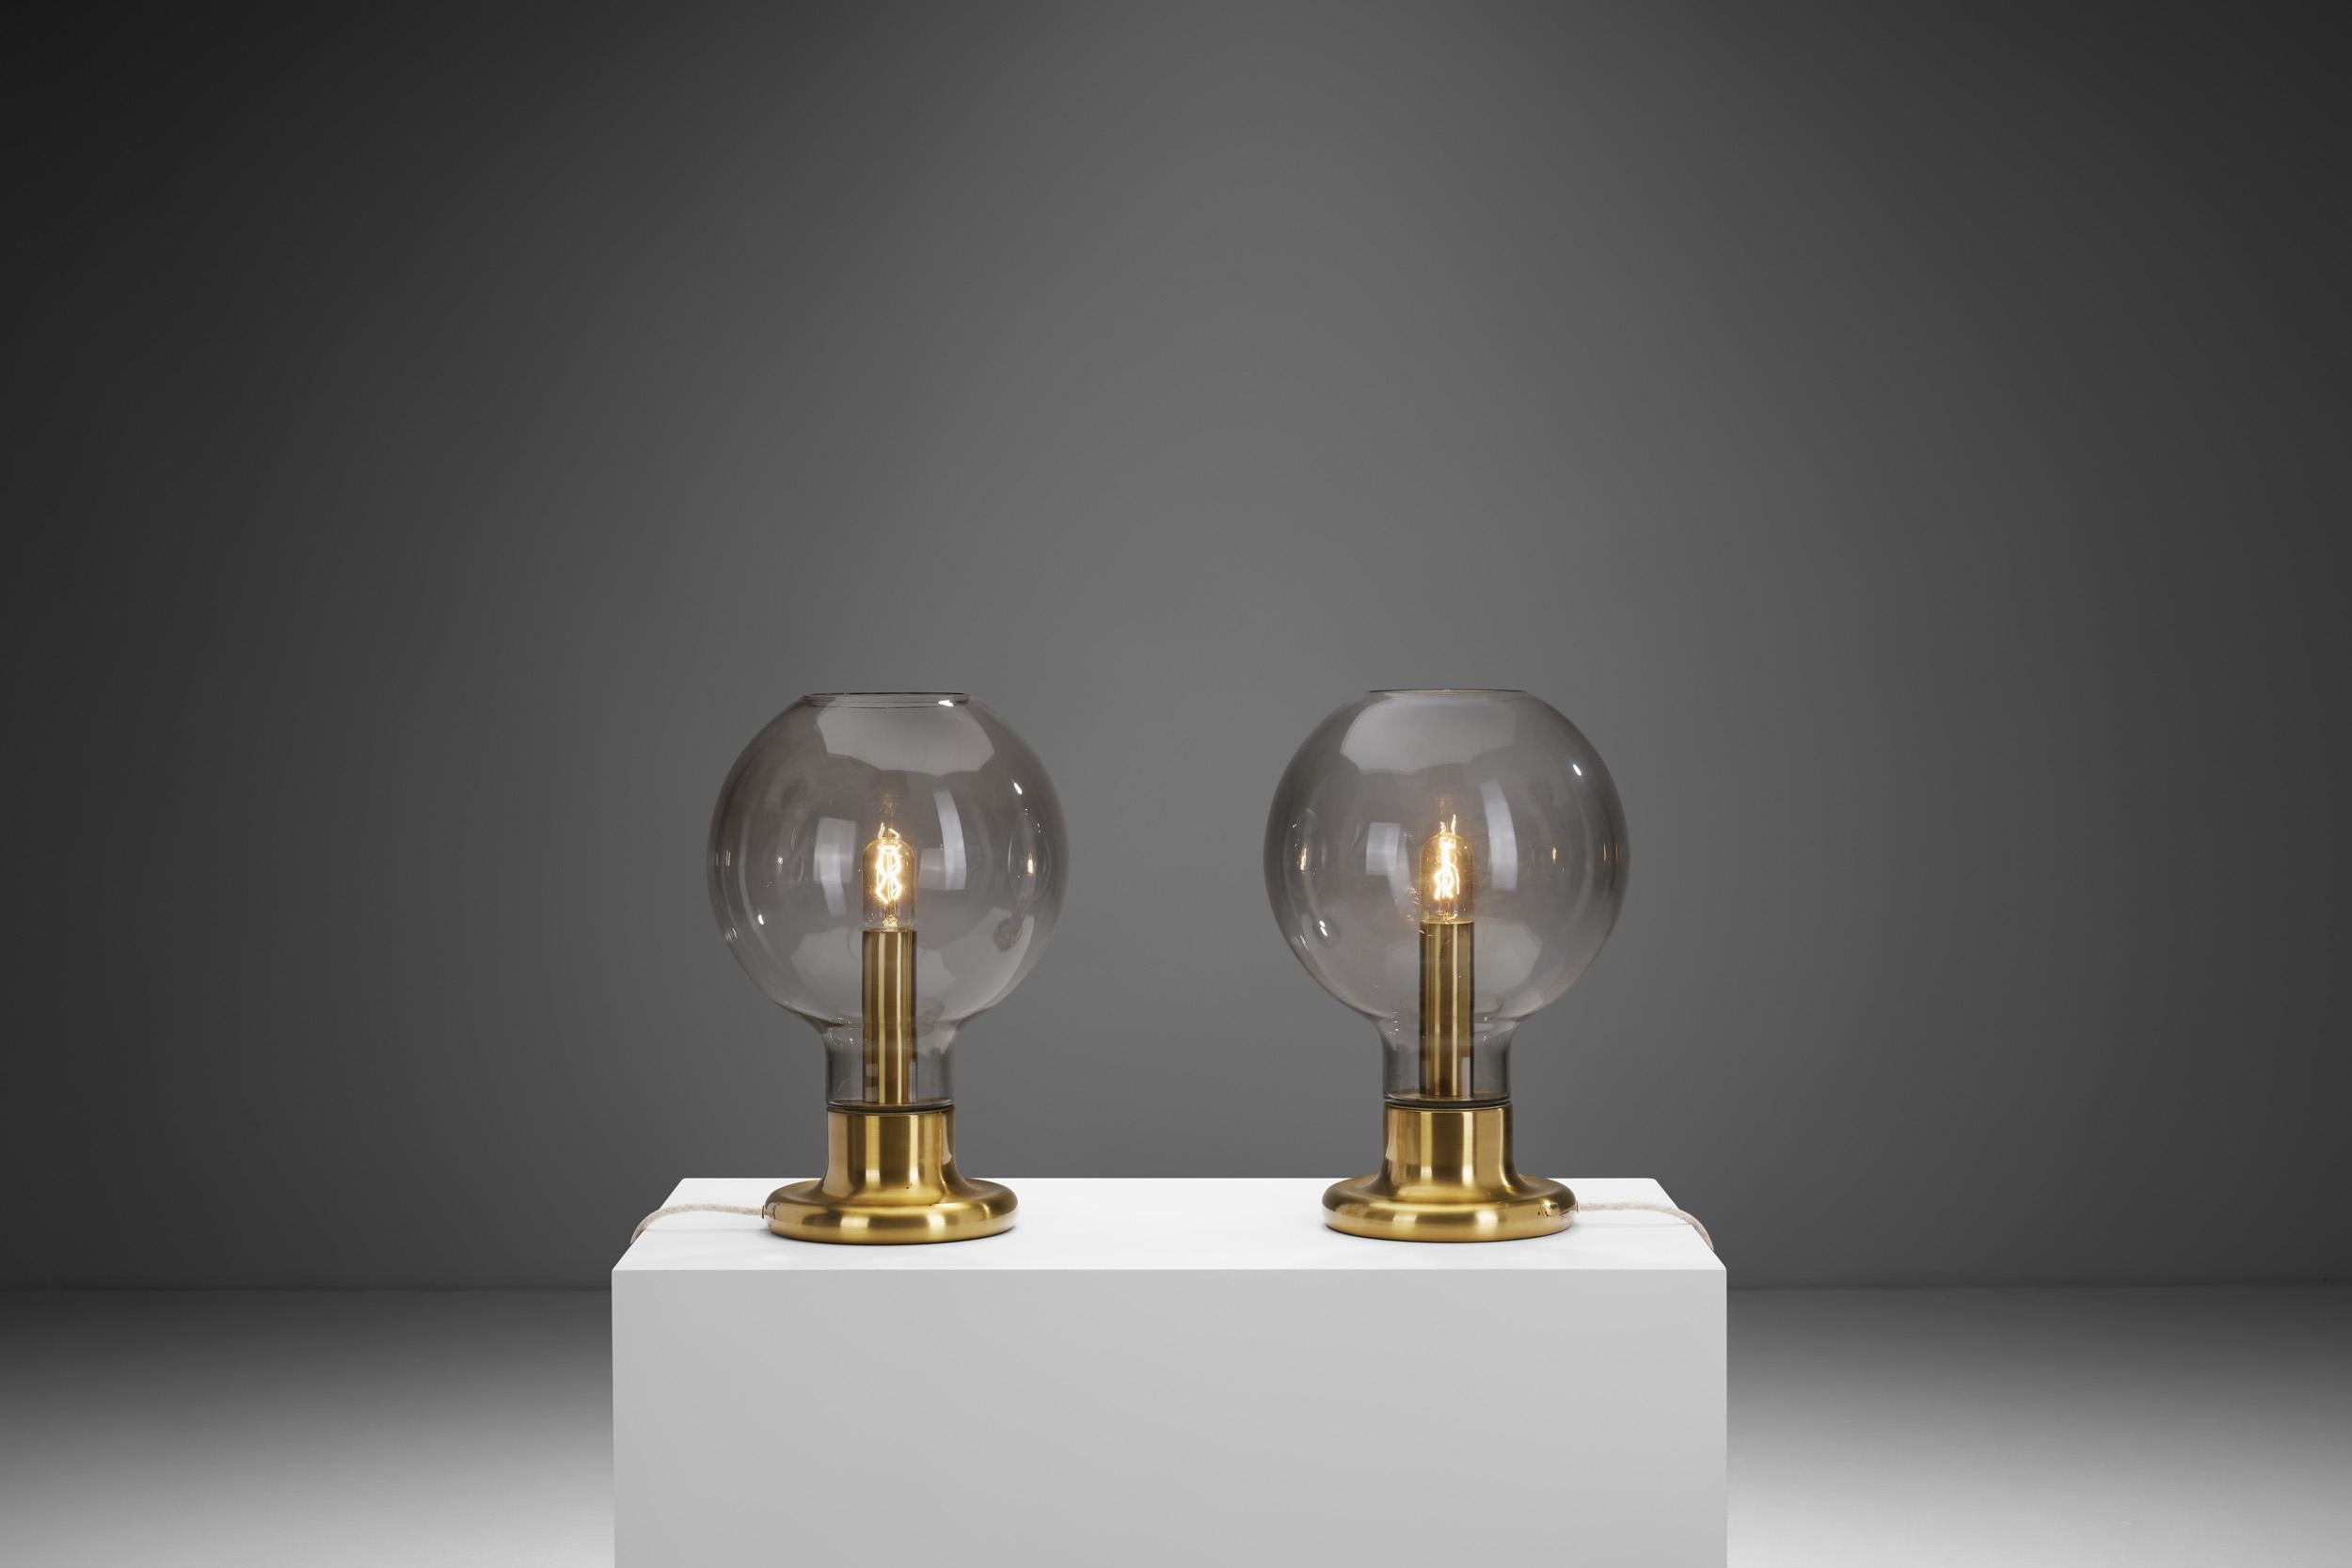 Rare Glass Dome Table Lamps by Cosack Leuchten, Germany 1970s For Sale 1